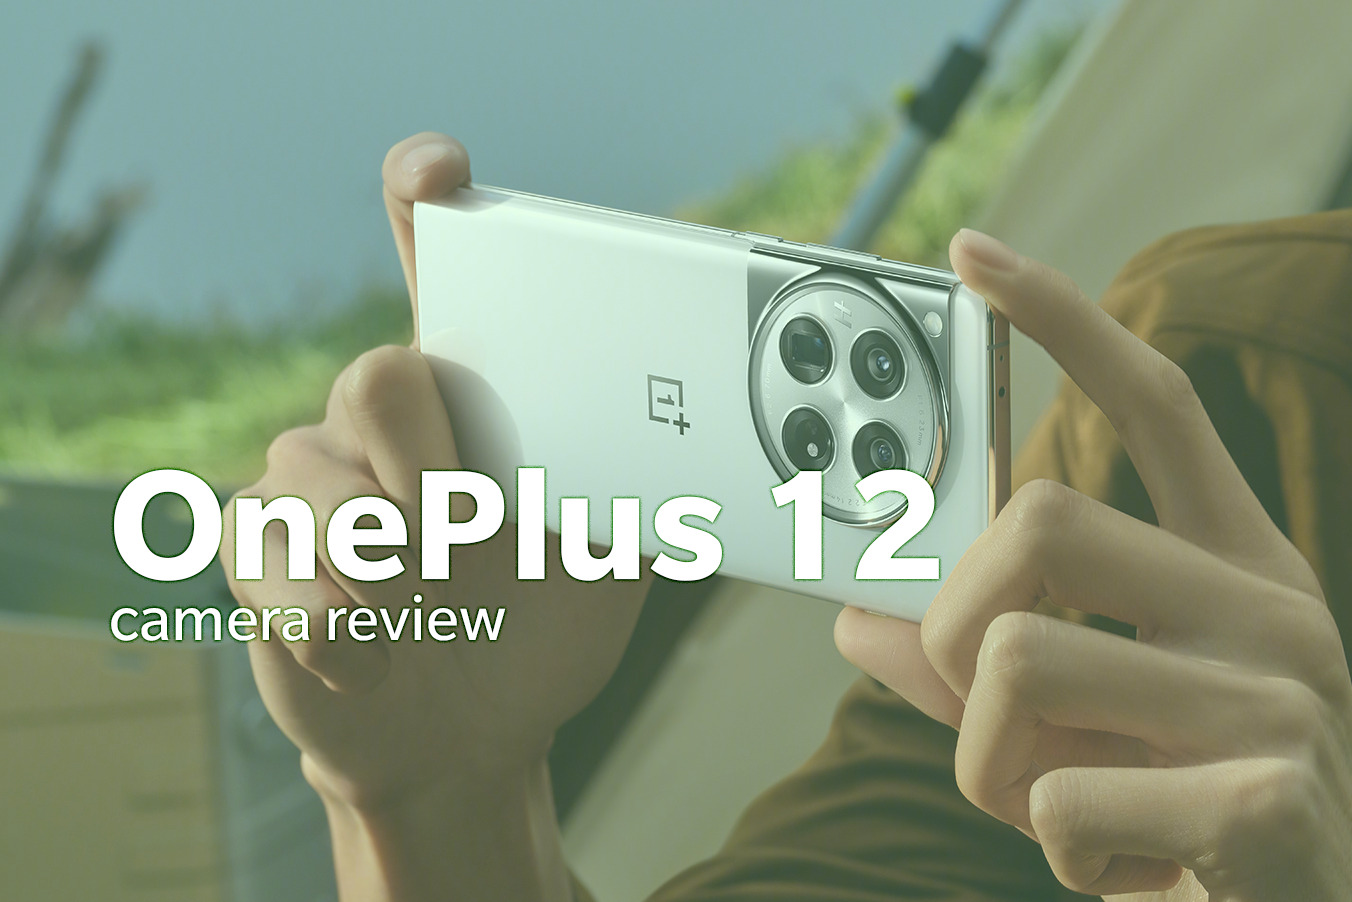 OnePlus 12 detailed camera review